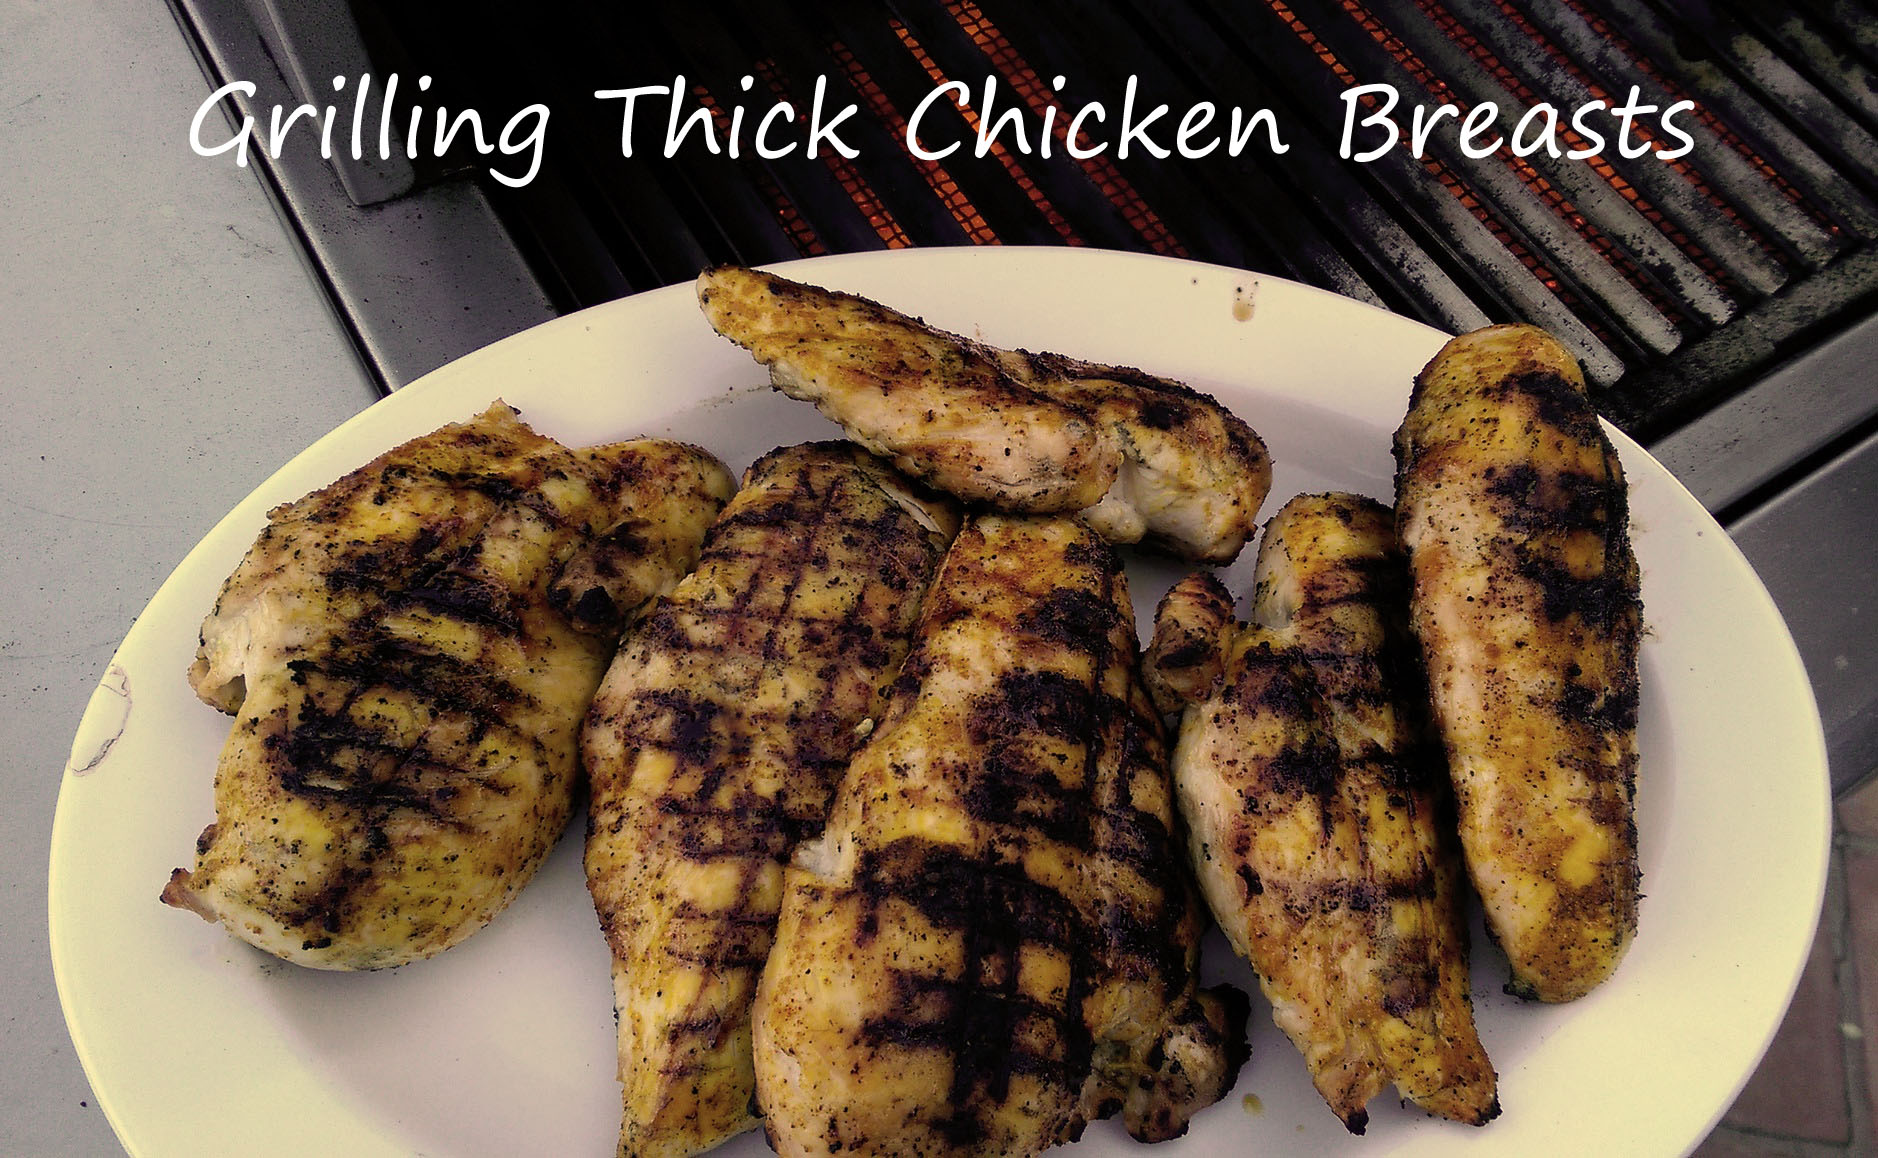 Grilling Thick Chicken Breast On An Infrared Grill The Best Hot Store,Milk Shake Recipe